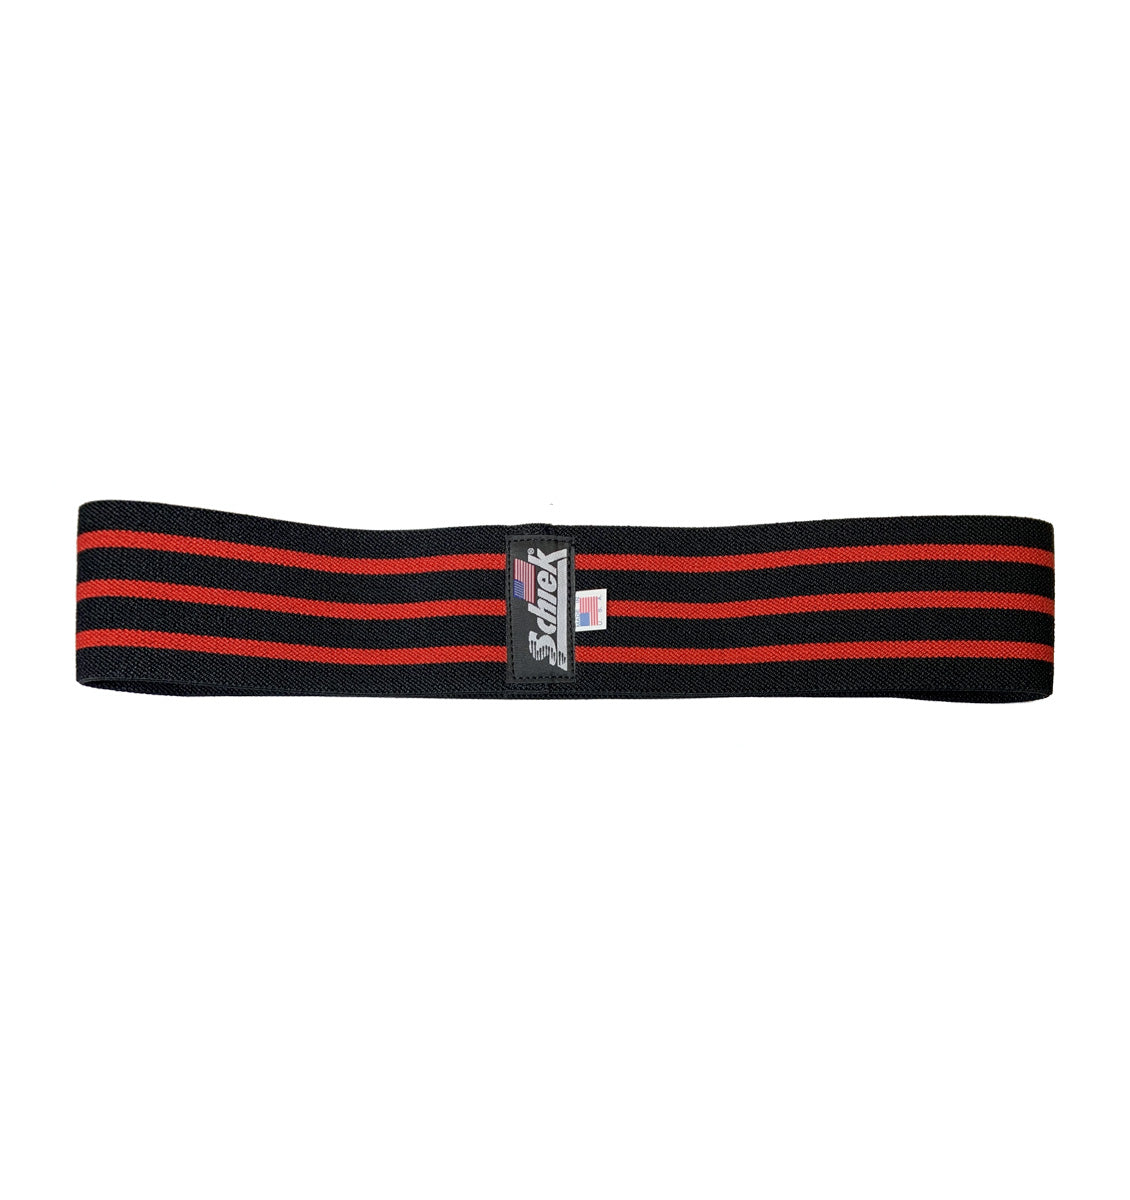 Schiek Hip Bands - Red - Large - 17"